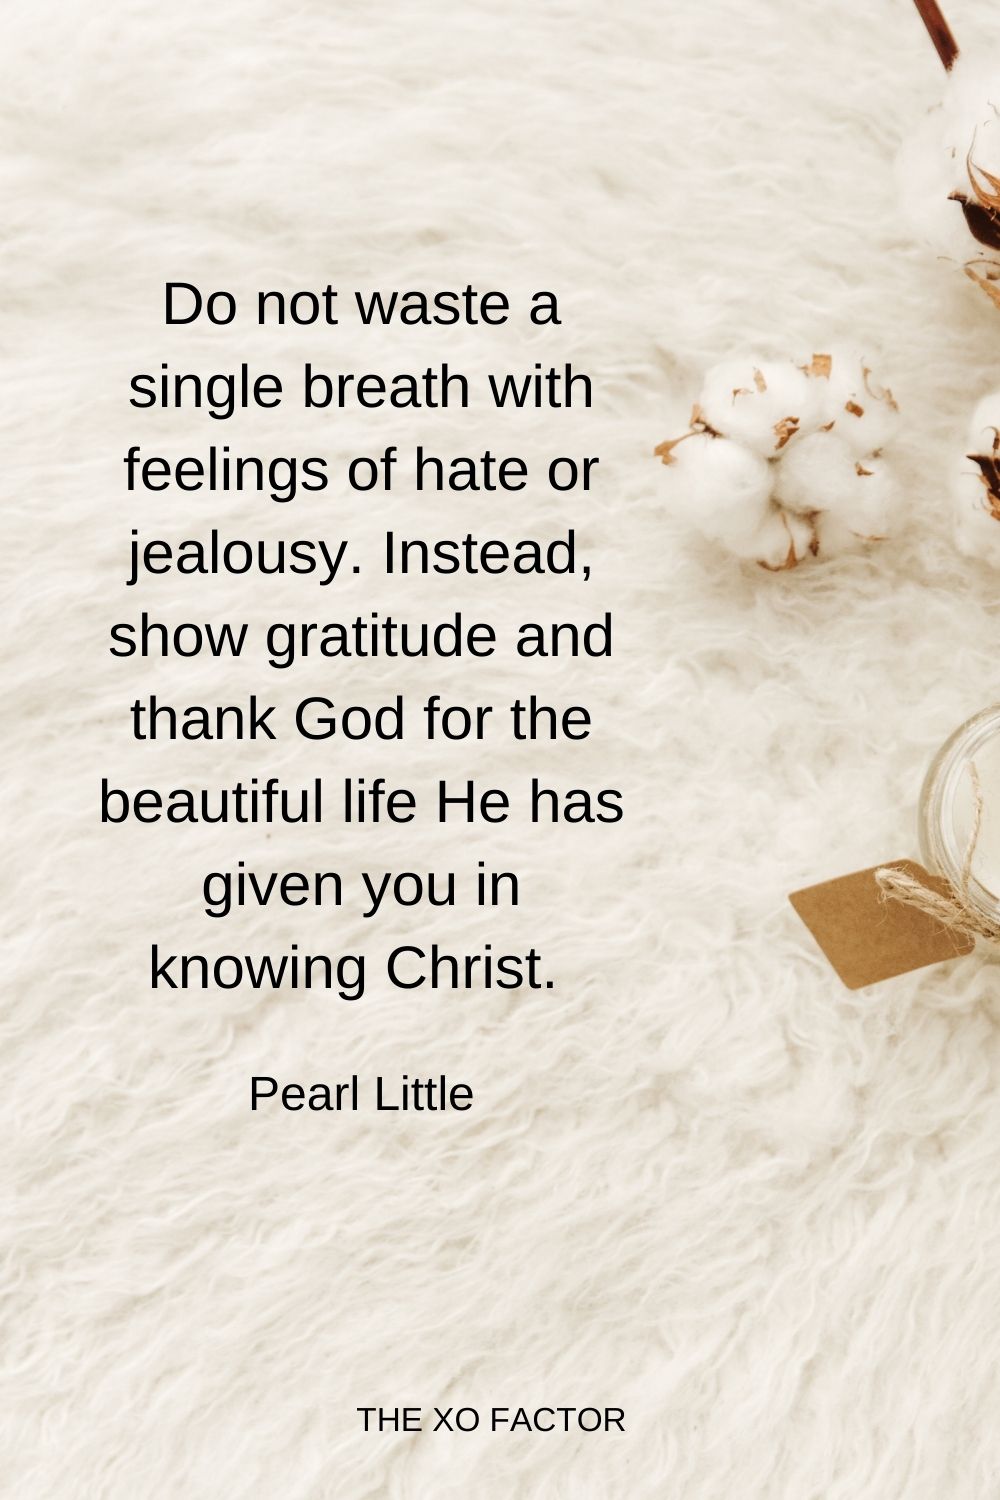 Do not waste a single breath with feelings of hate or jealousy. Instead, show gratitude and thank God for the beautiful life He has given you in knowing Christ.  Pearl Little